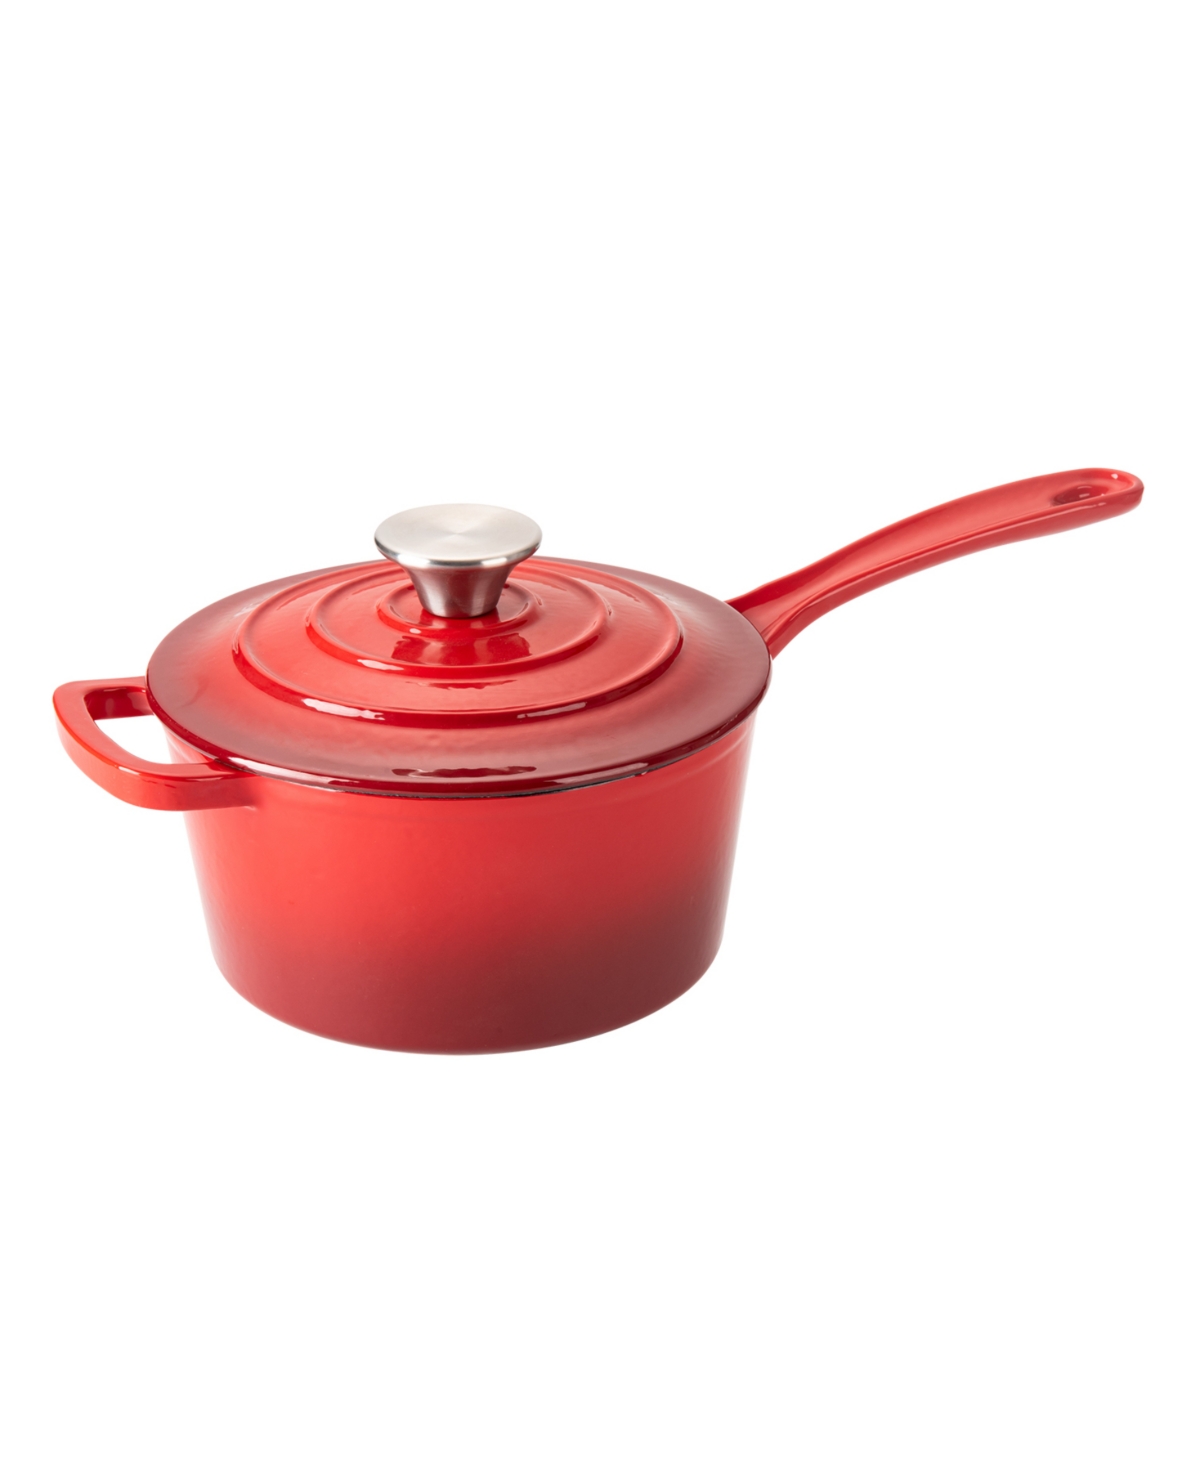 Hamilton Beach 2 Quart Cast Iron 2 Piece Sauce Pan With Stainless Steel Knob Set In Red